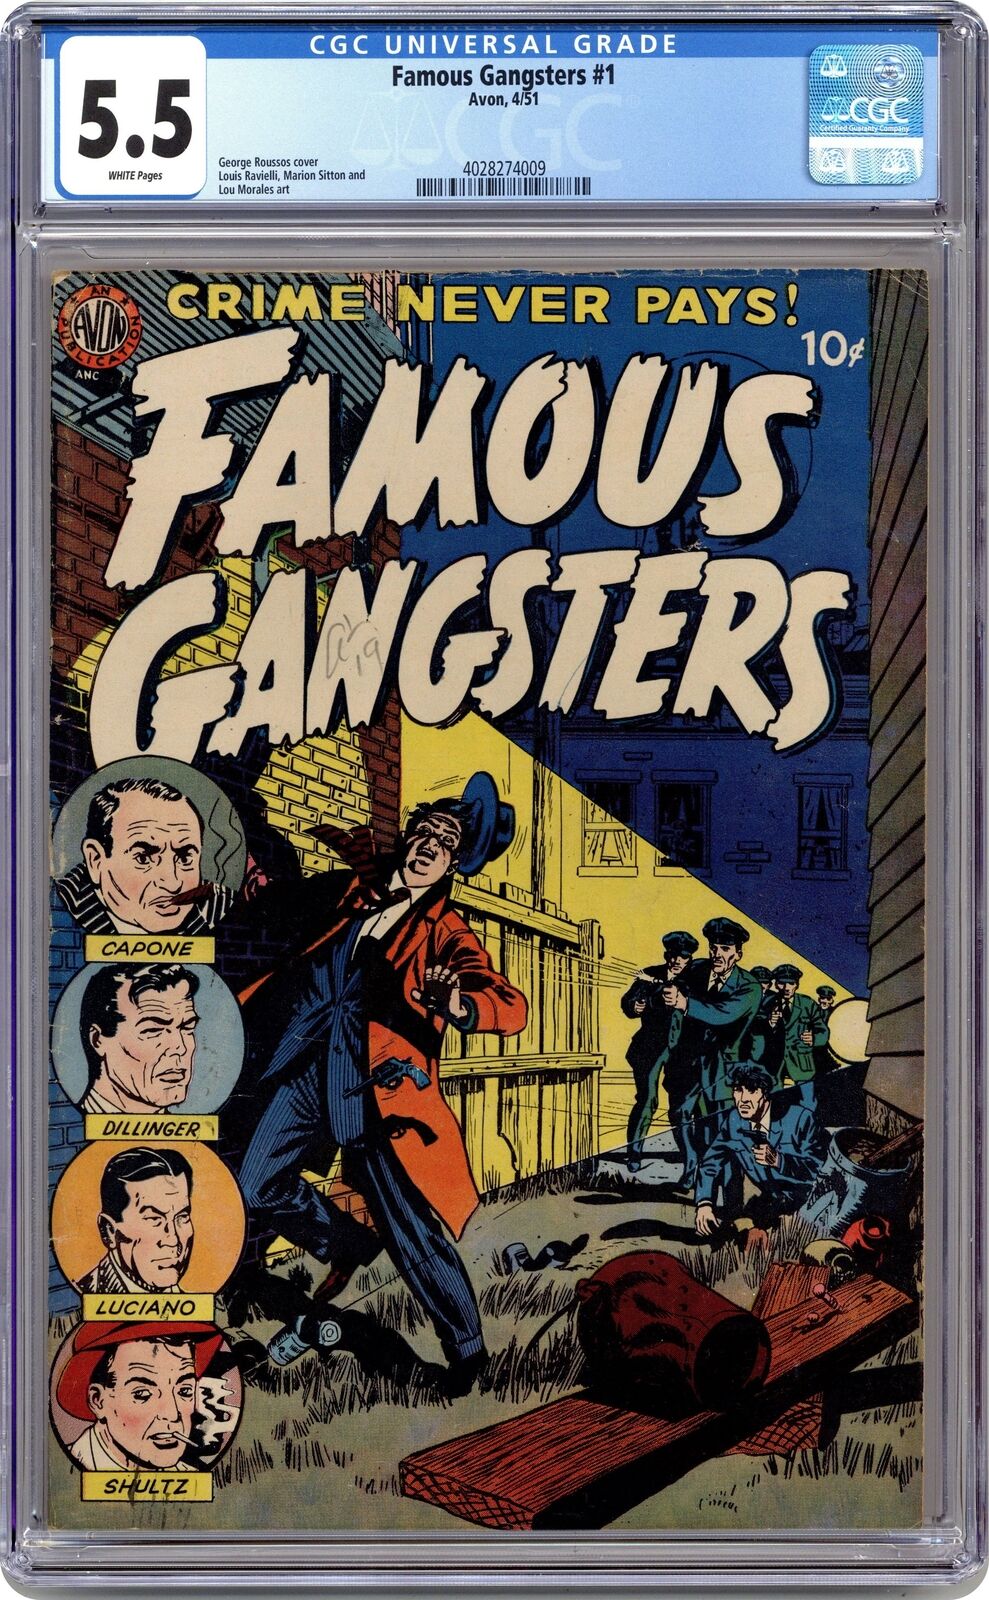 Famous Gangsters #1 CGC 5.5 1951 4028274009